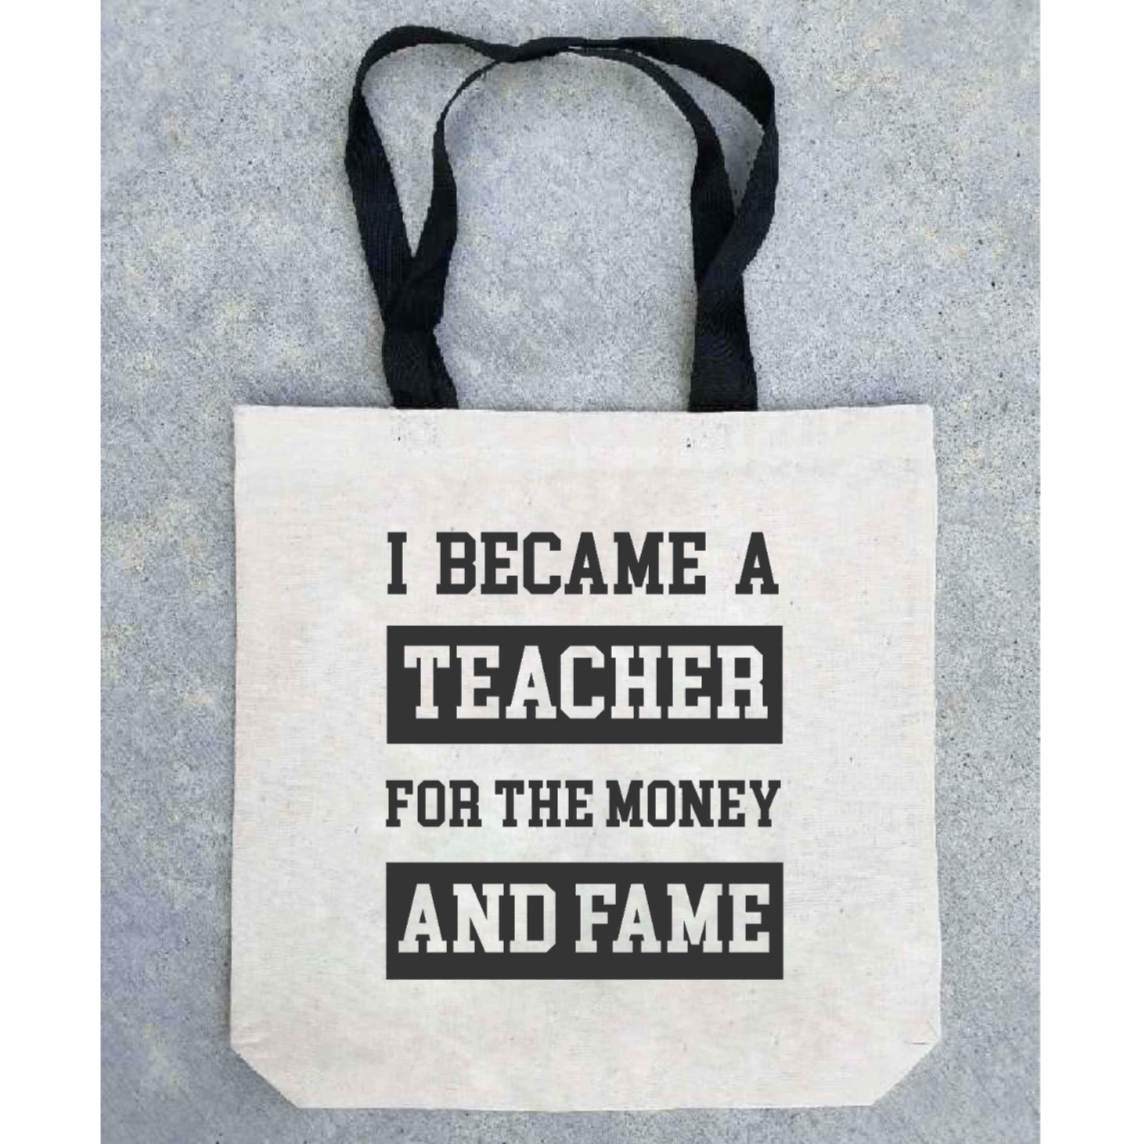 For The Money and Fame Teacher Tote Bag